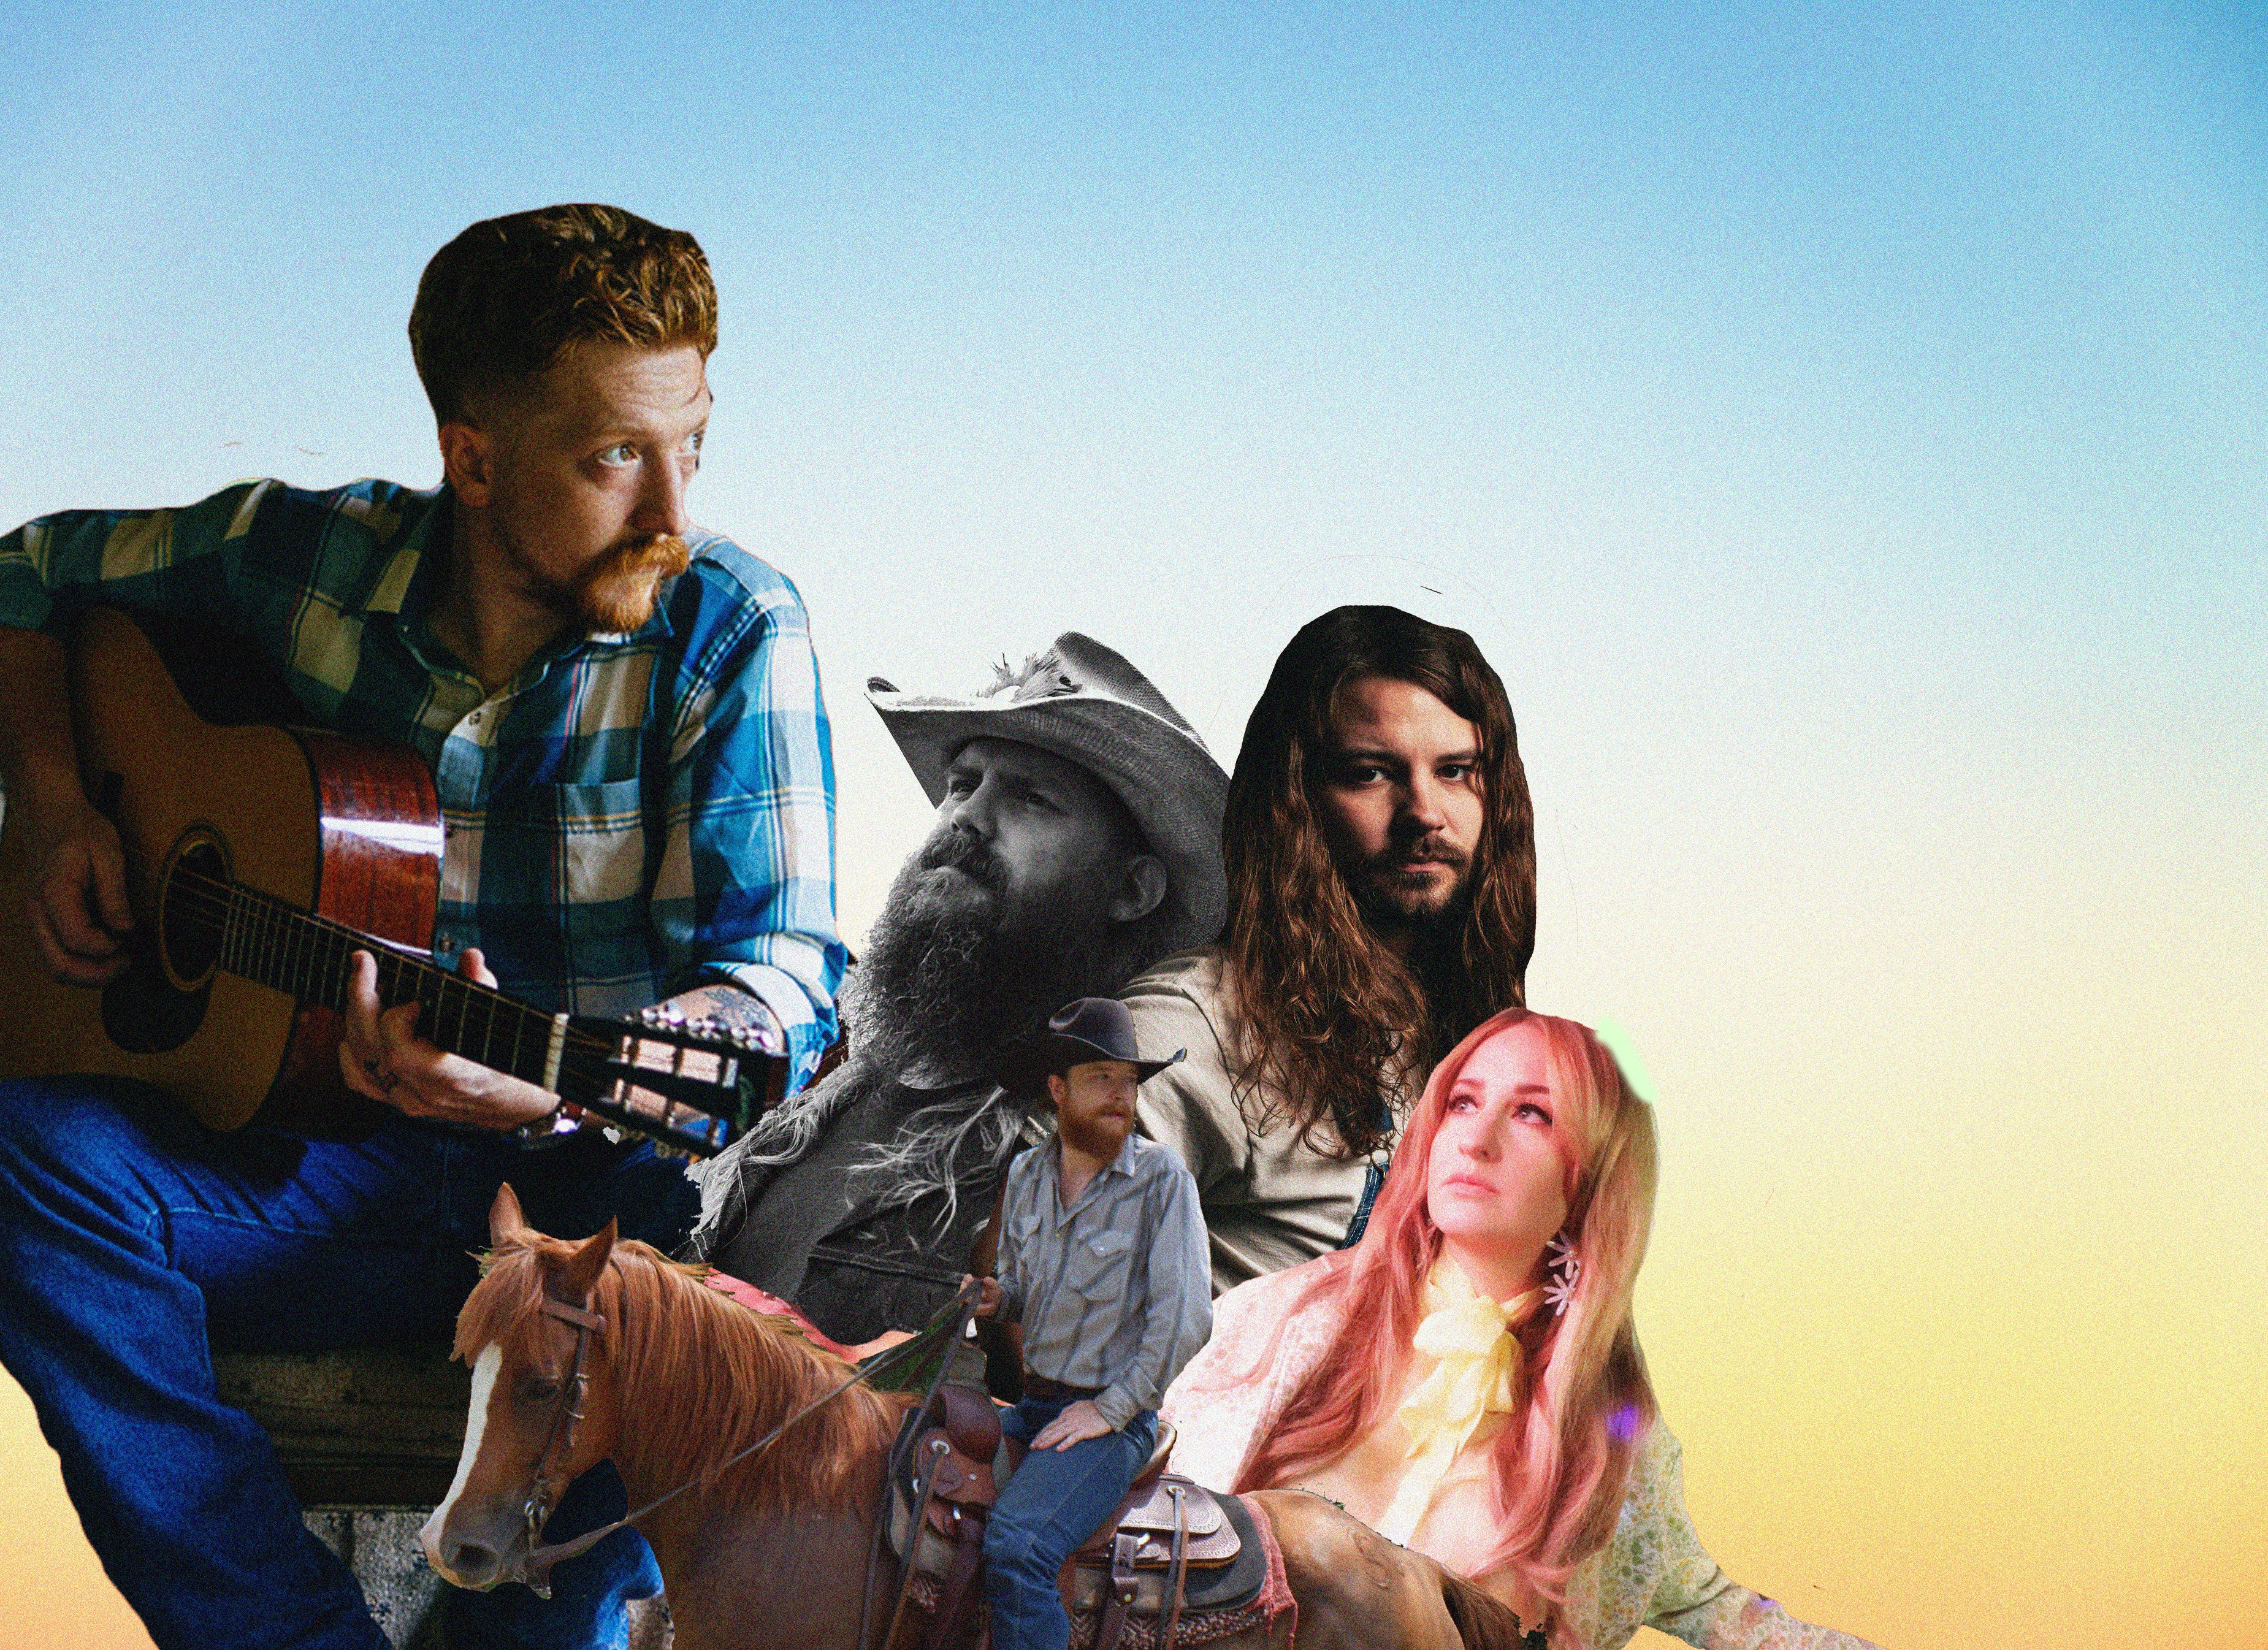 Clockwise from the left: Tyler Childers, Chris Stapleton, Brent Cobb, Margo Price and Colter Wall